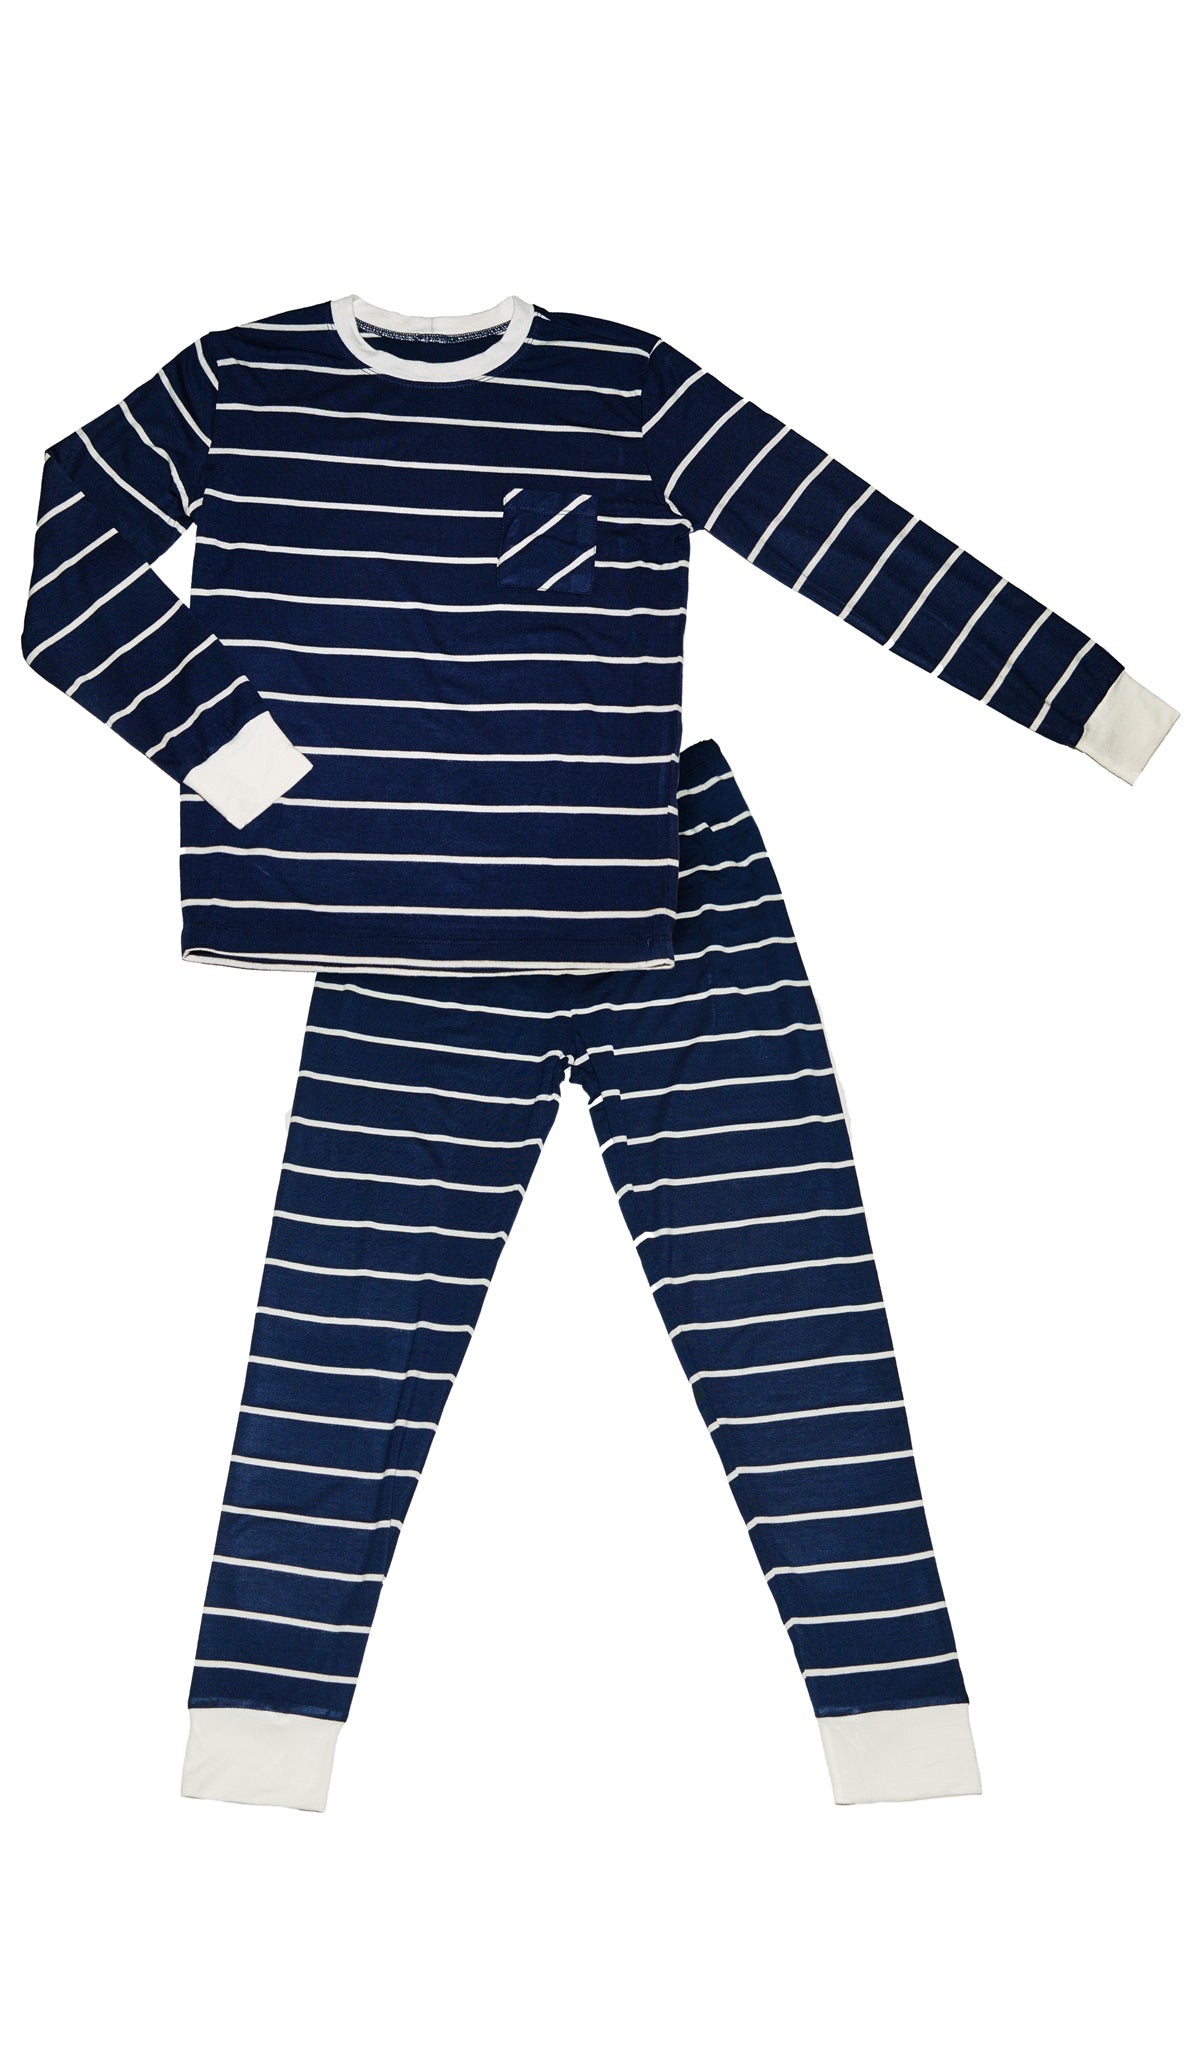 Navy Emerson Kids 2-Piece Pant PJ consisting of a long sleeve tee and long pannts.